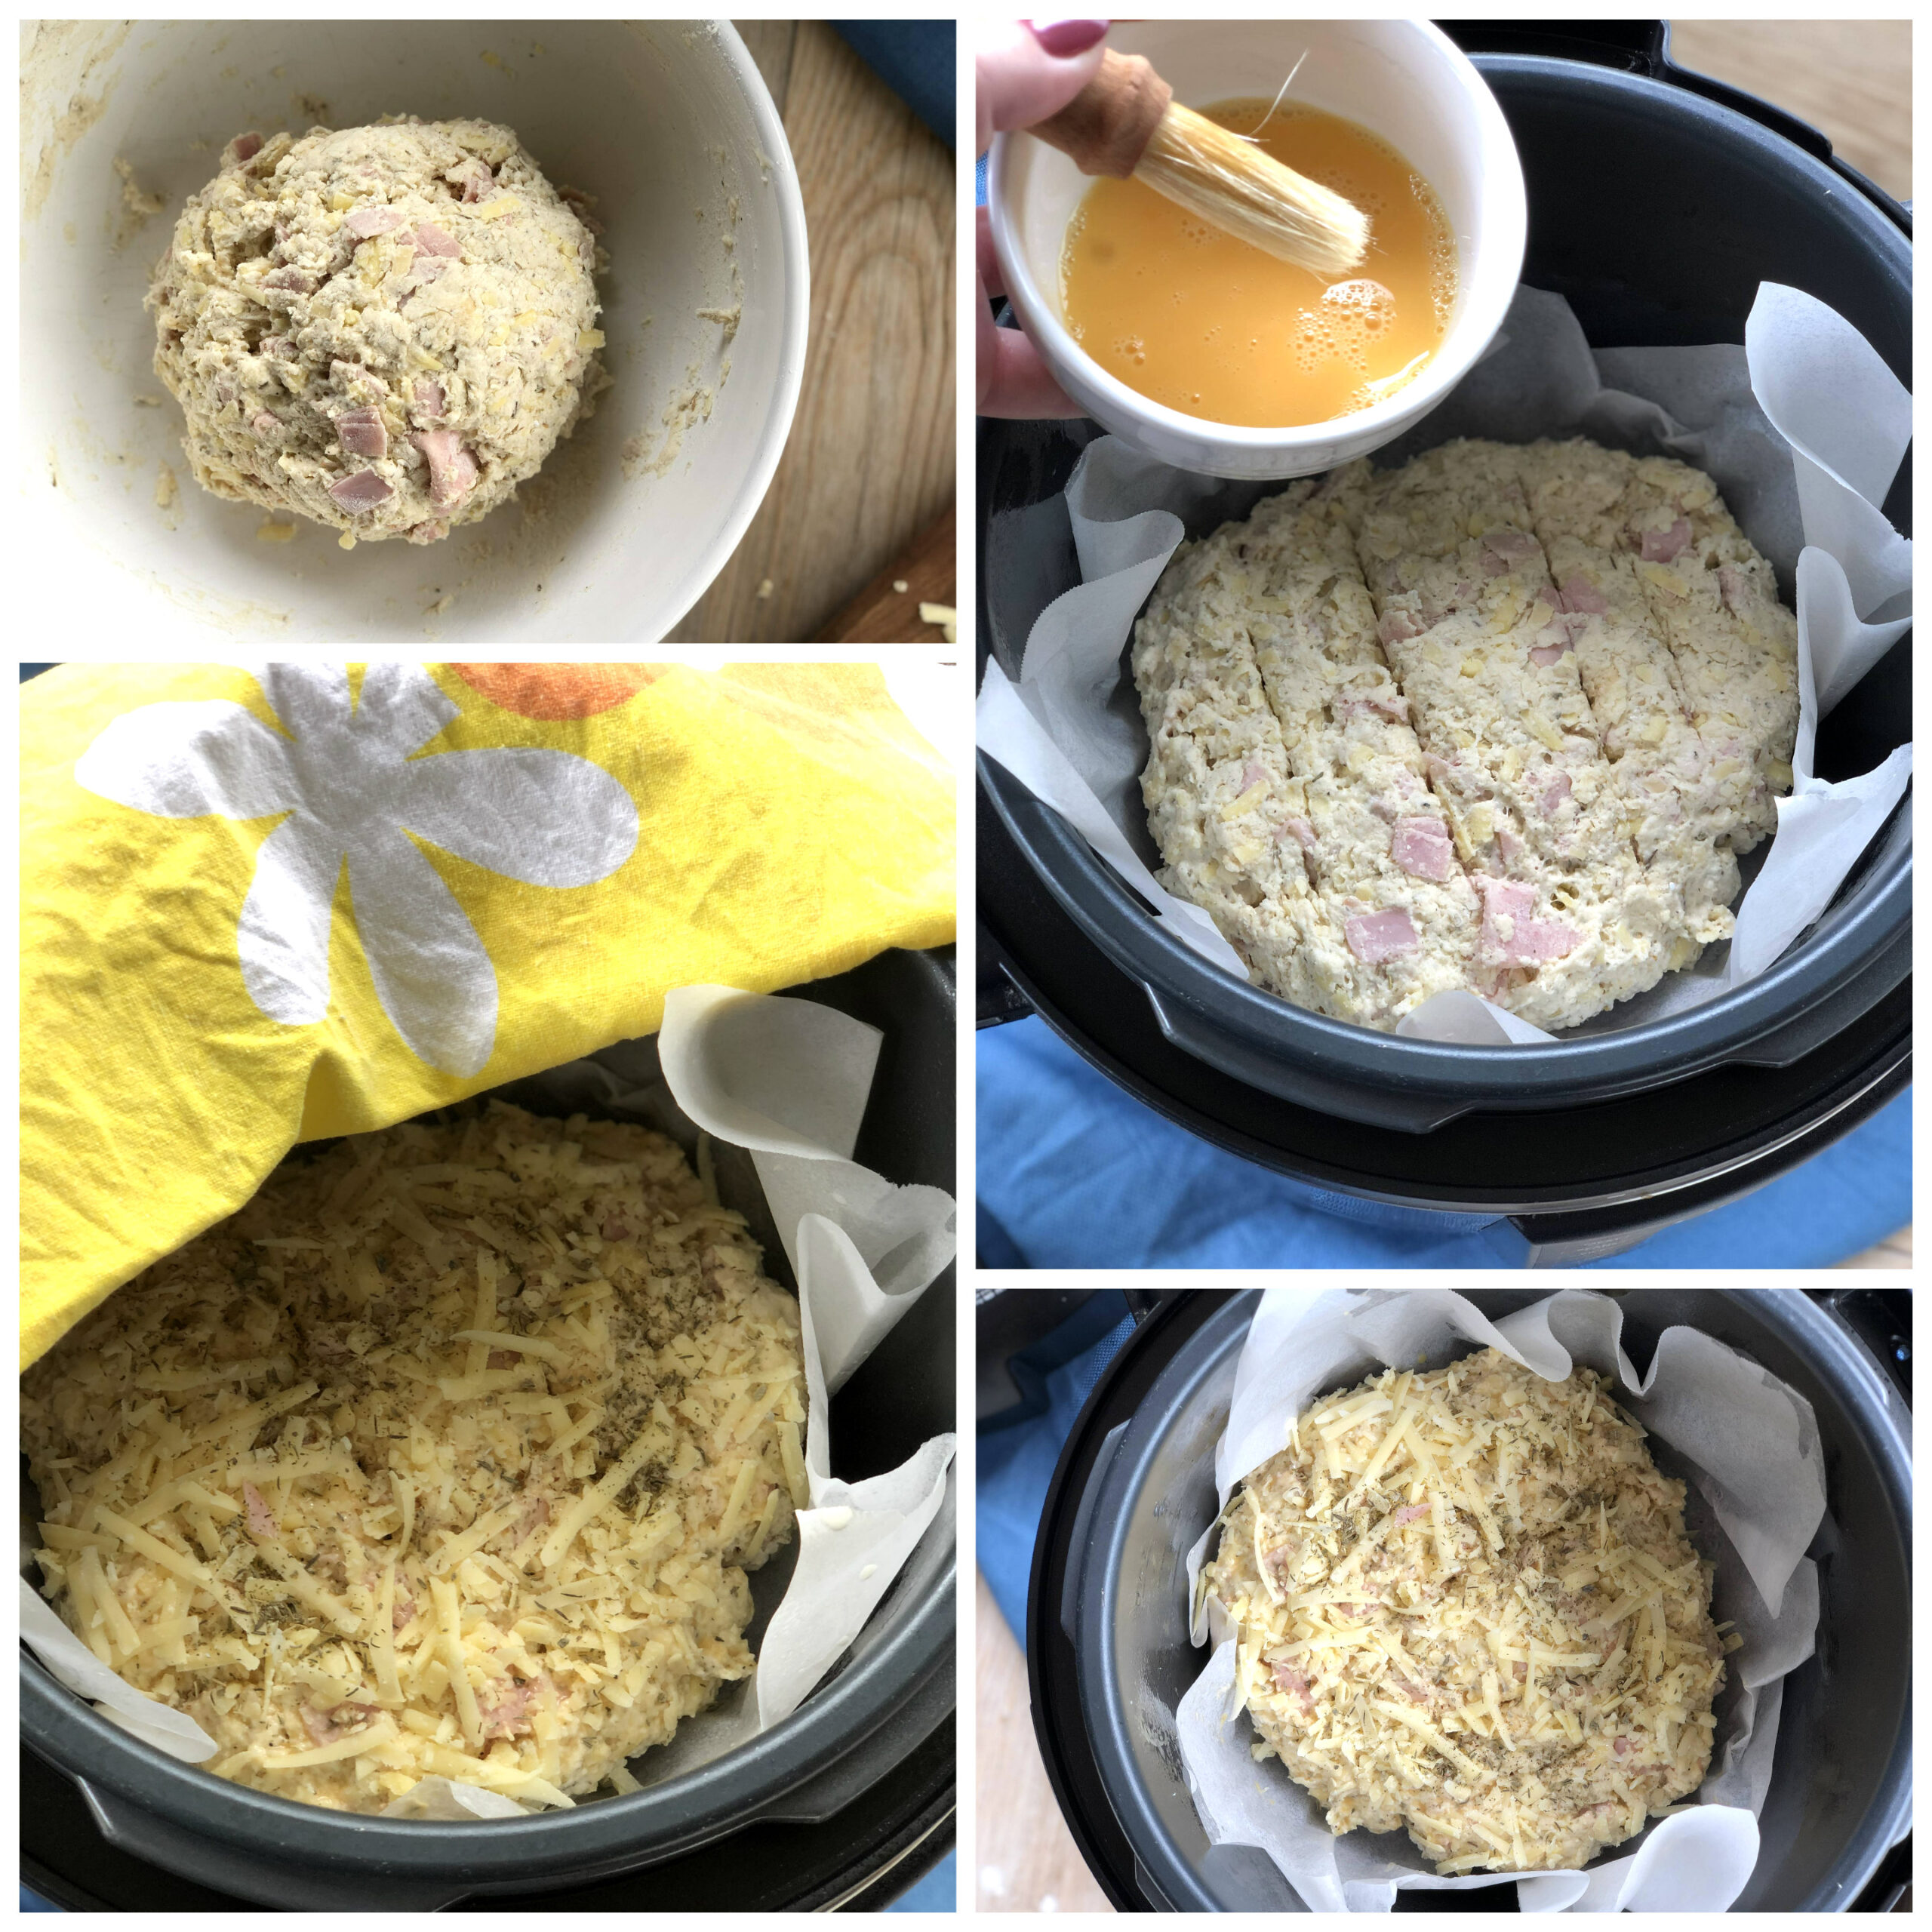 How to Make Slow Cooker Cheesy Savoury Loaf 